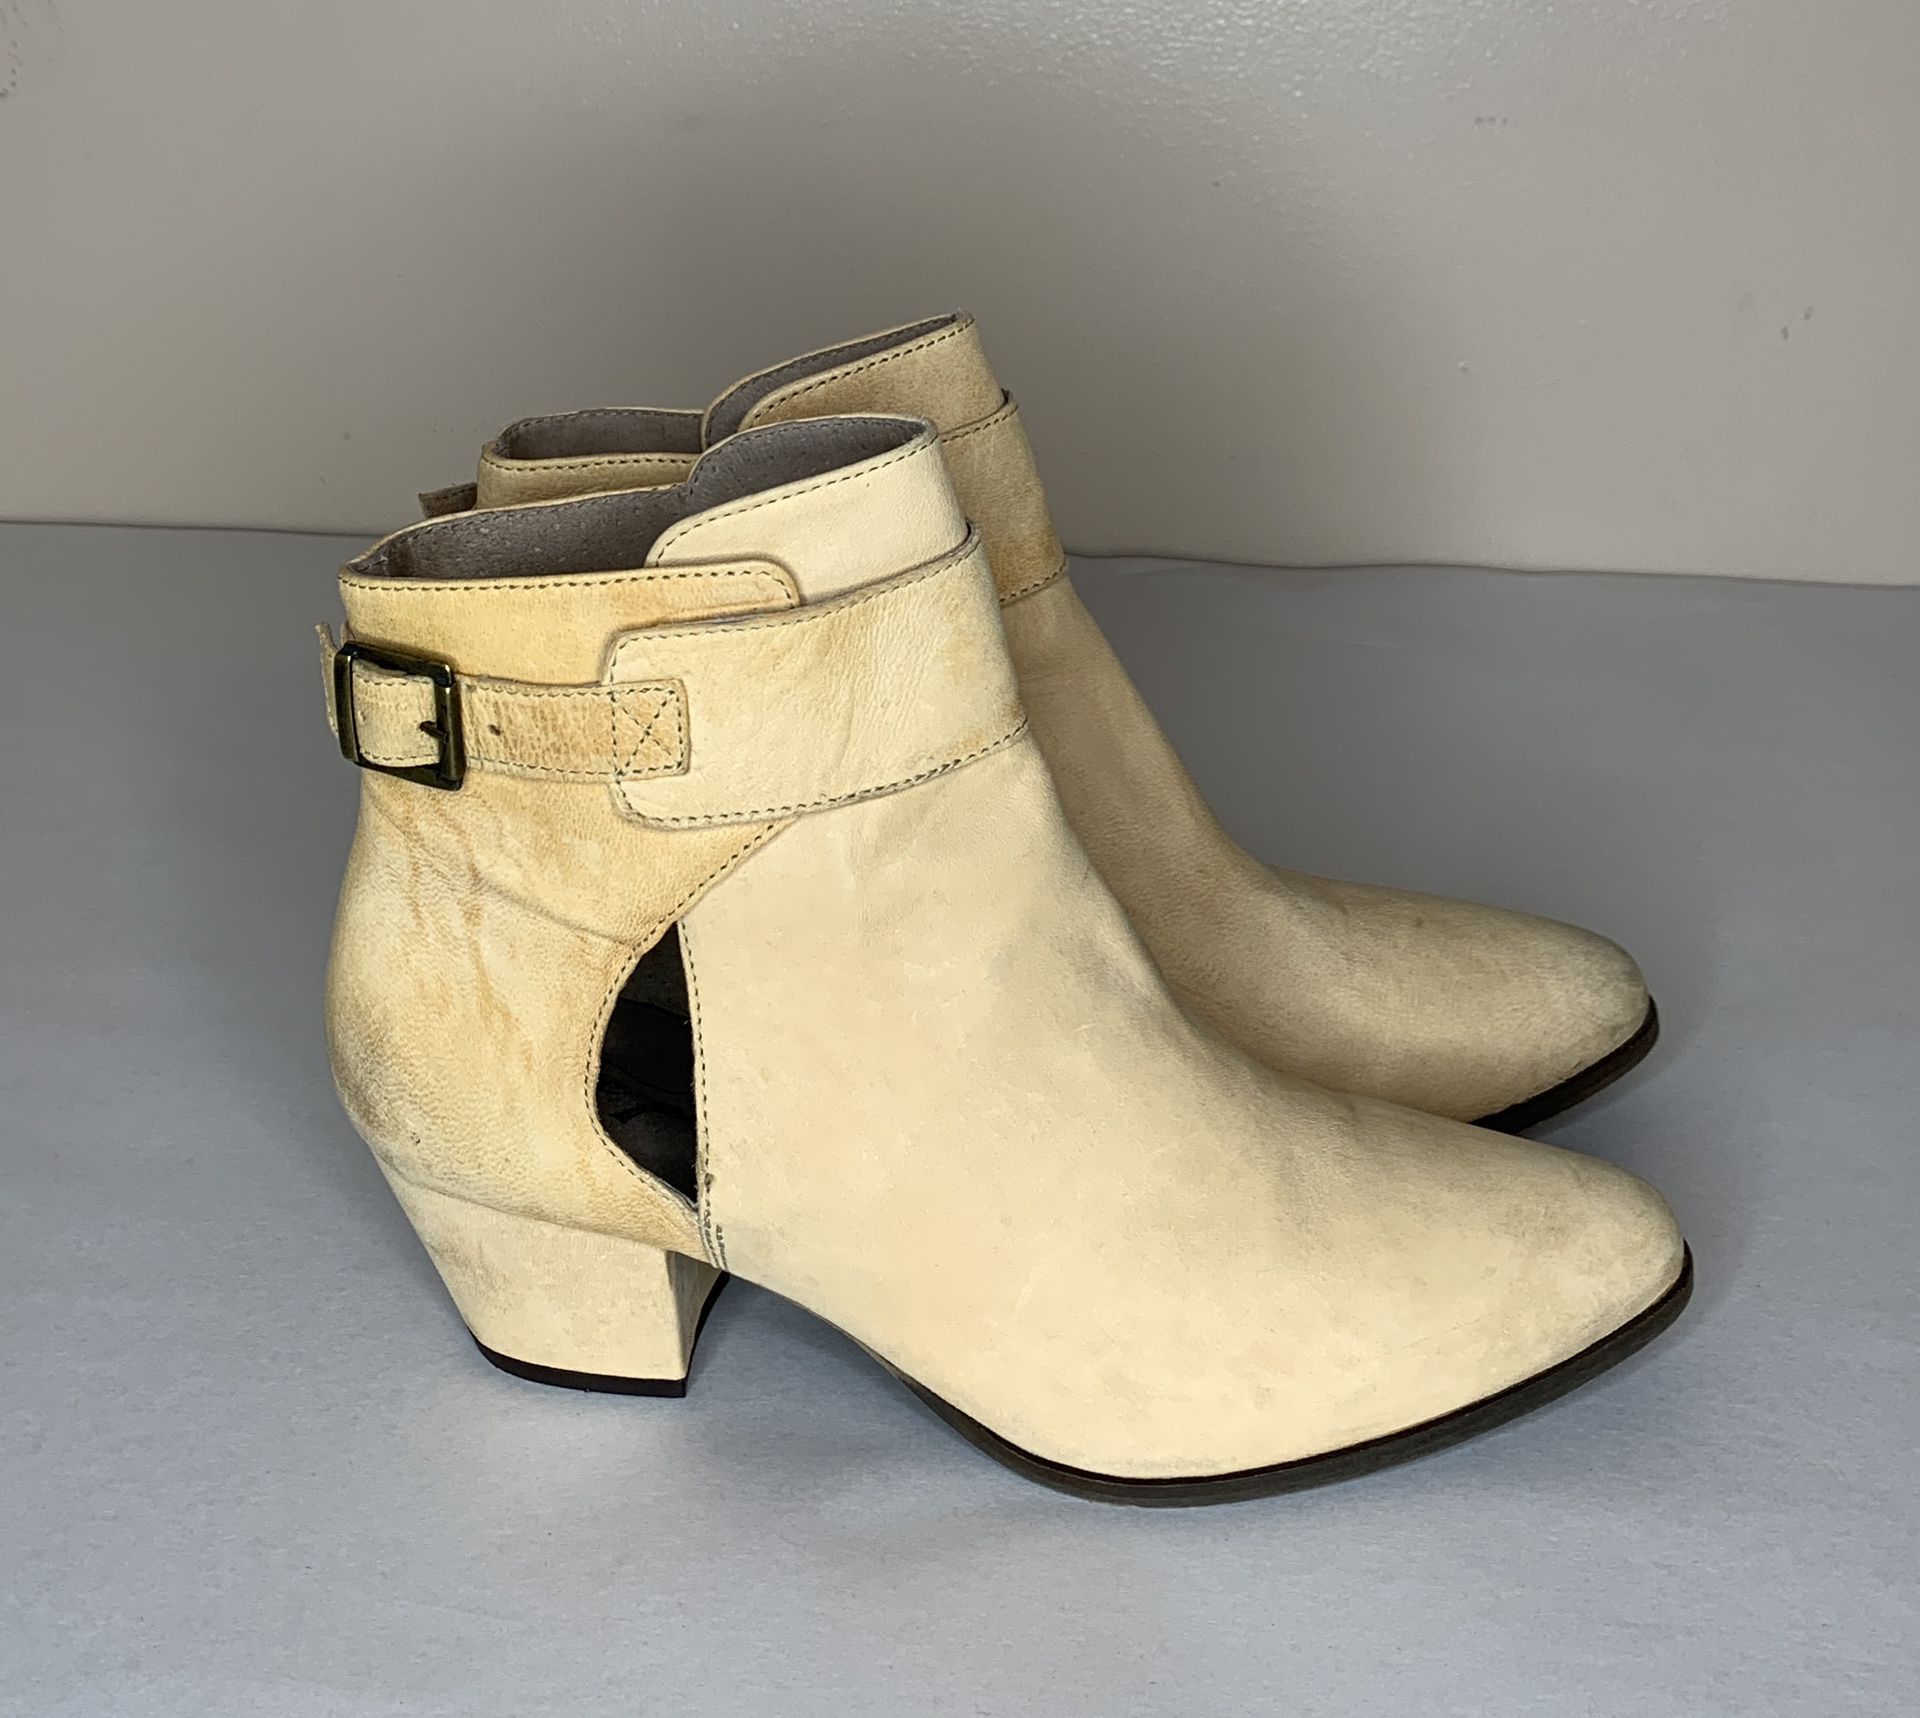 Free People Belleville Ankle Boot Size 8.5 (41) MSRP: $198 New Women Leather Pre-owned